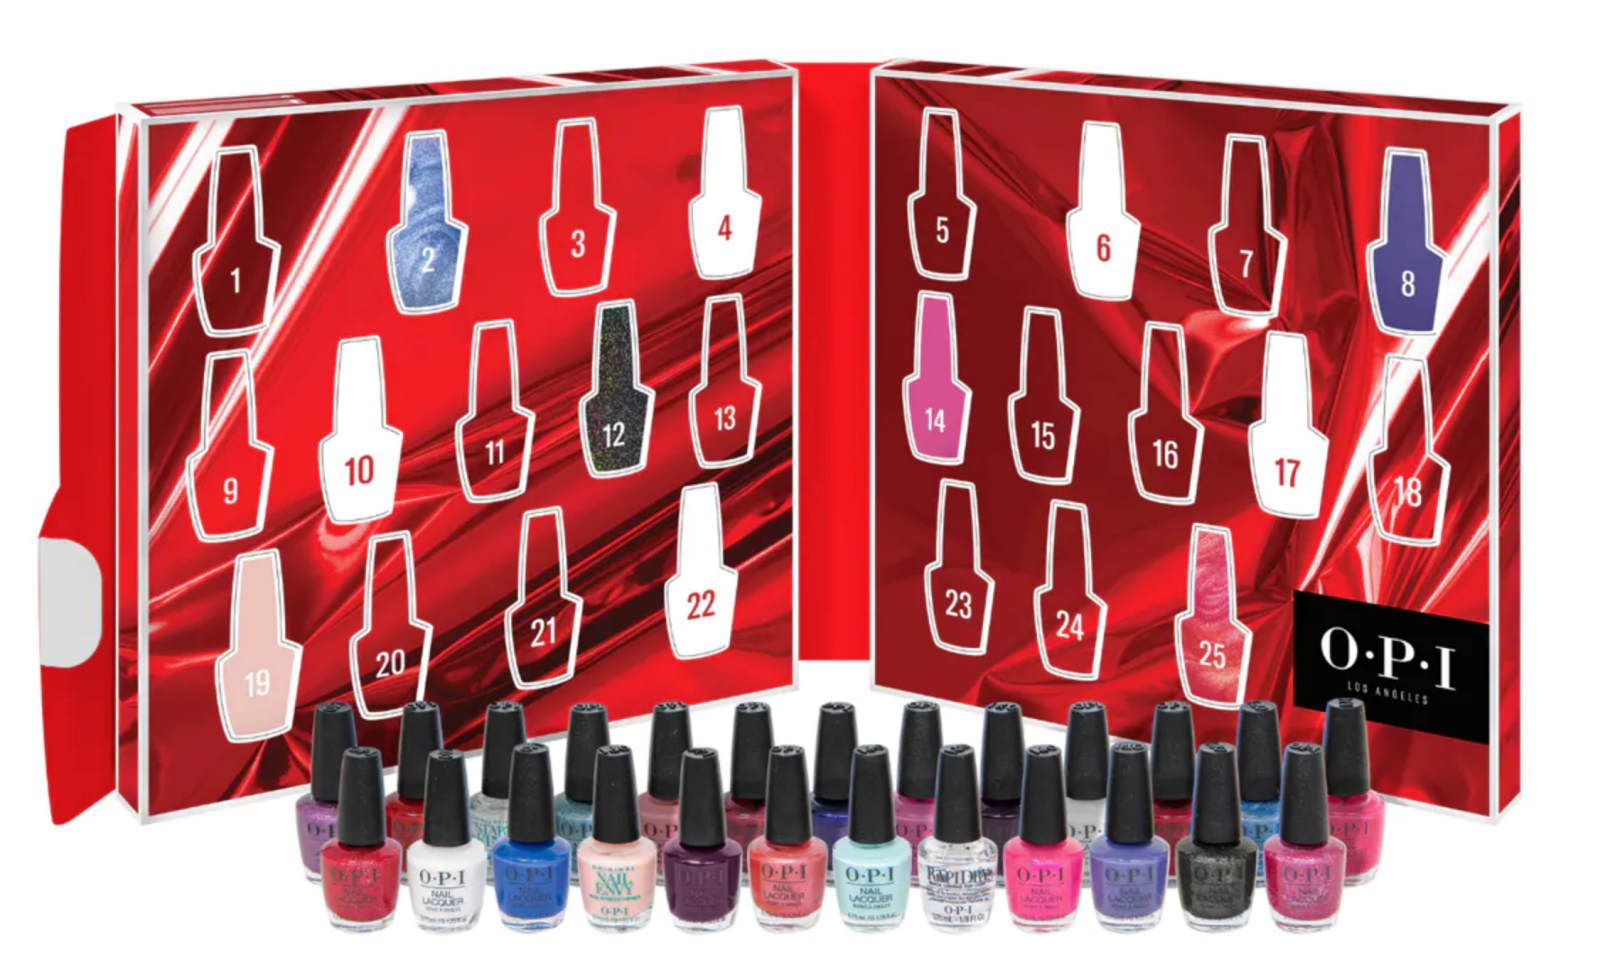 OPI Advent Calendar 2021 - Available Now! - Contents & Release Date